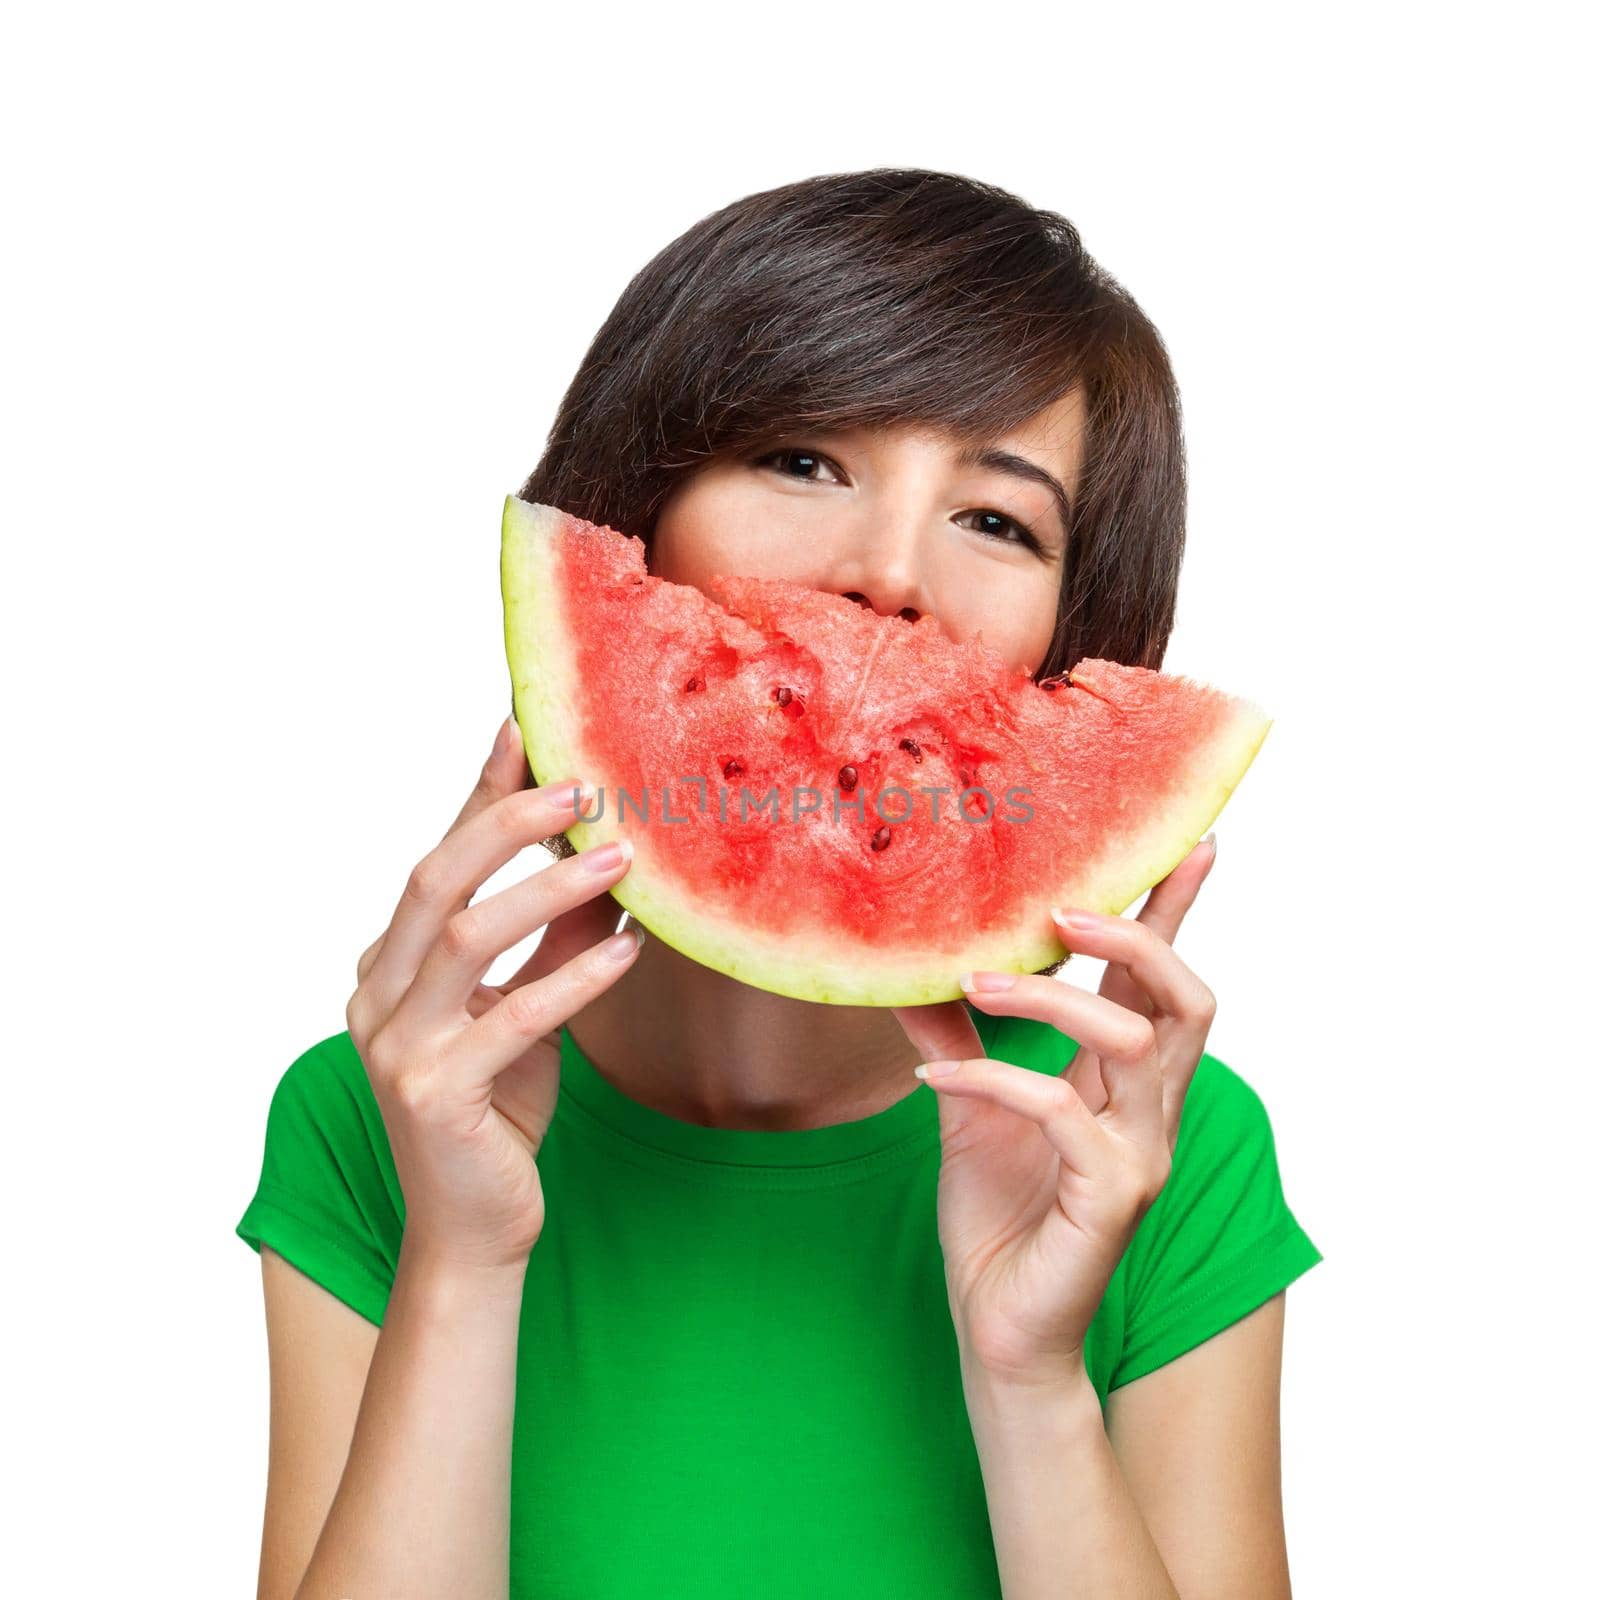 Smiling young woman holding watermelon on a white background